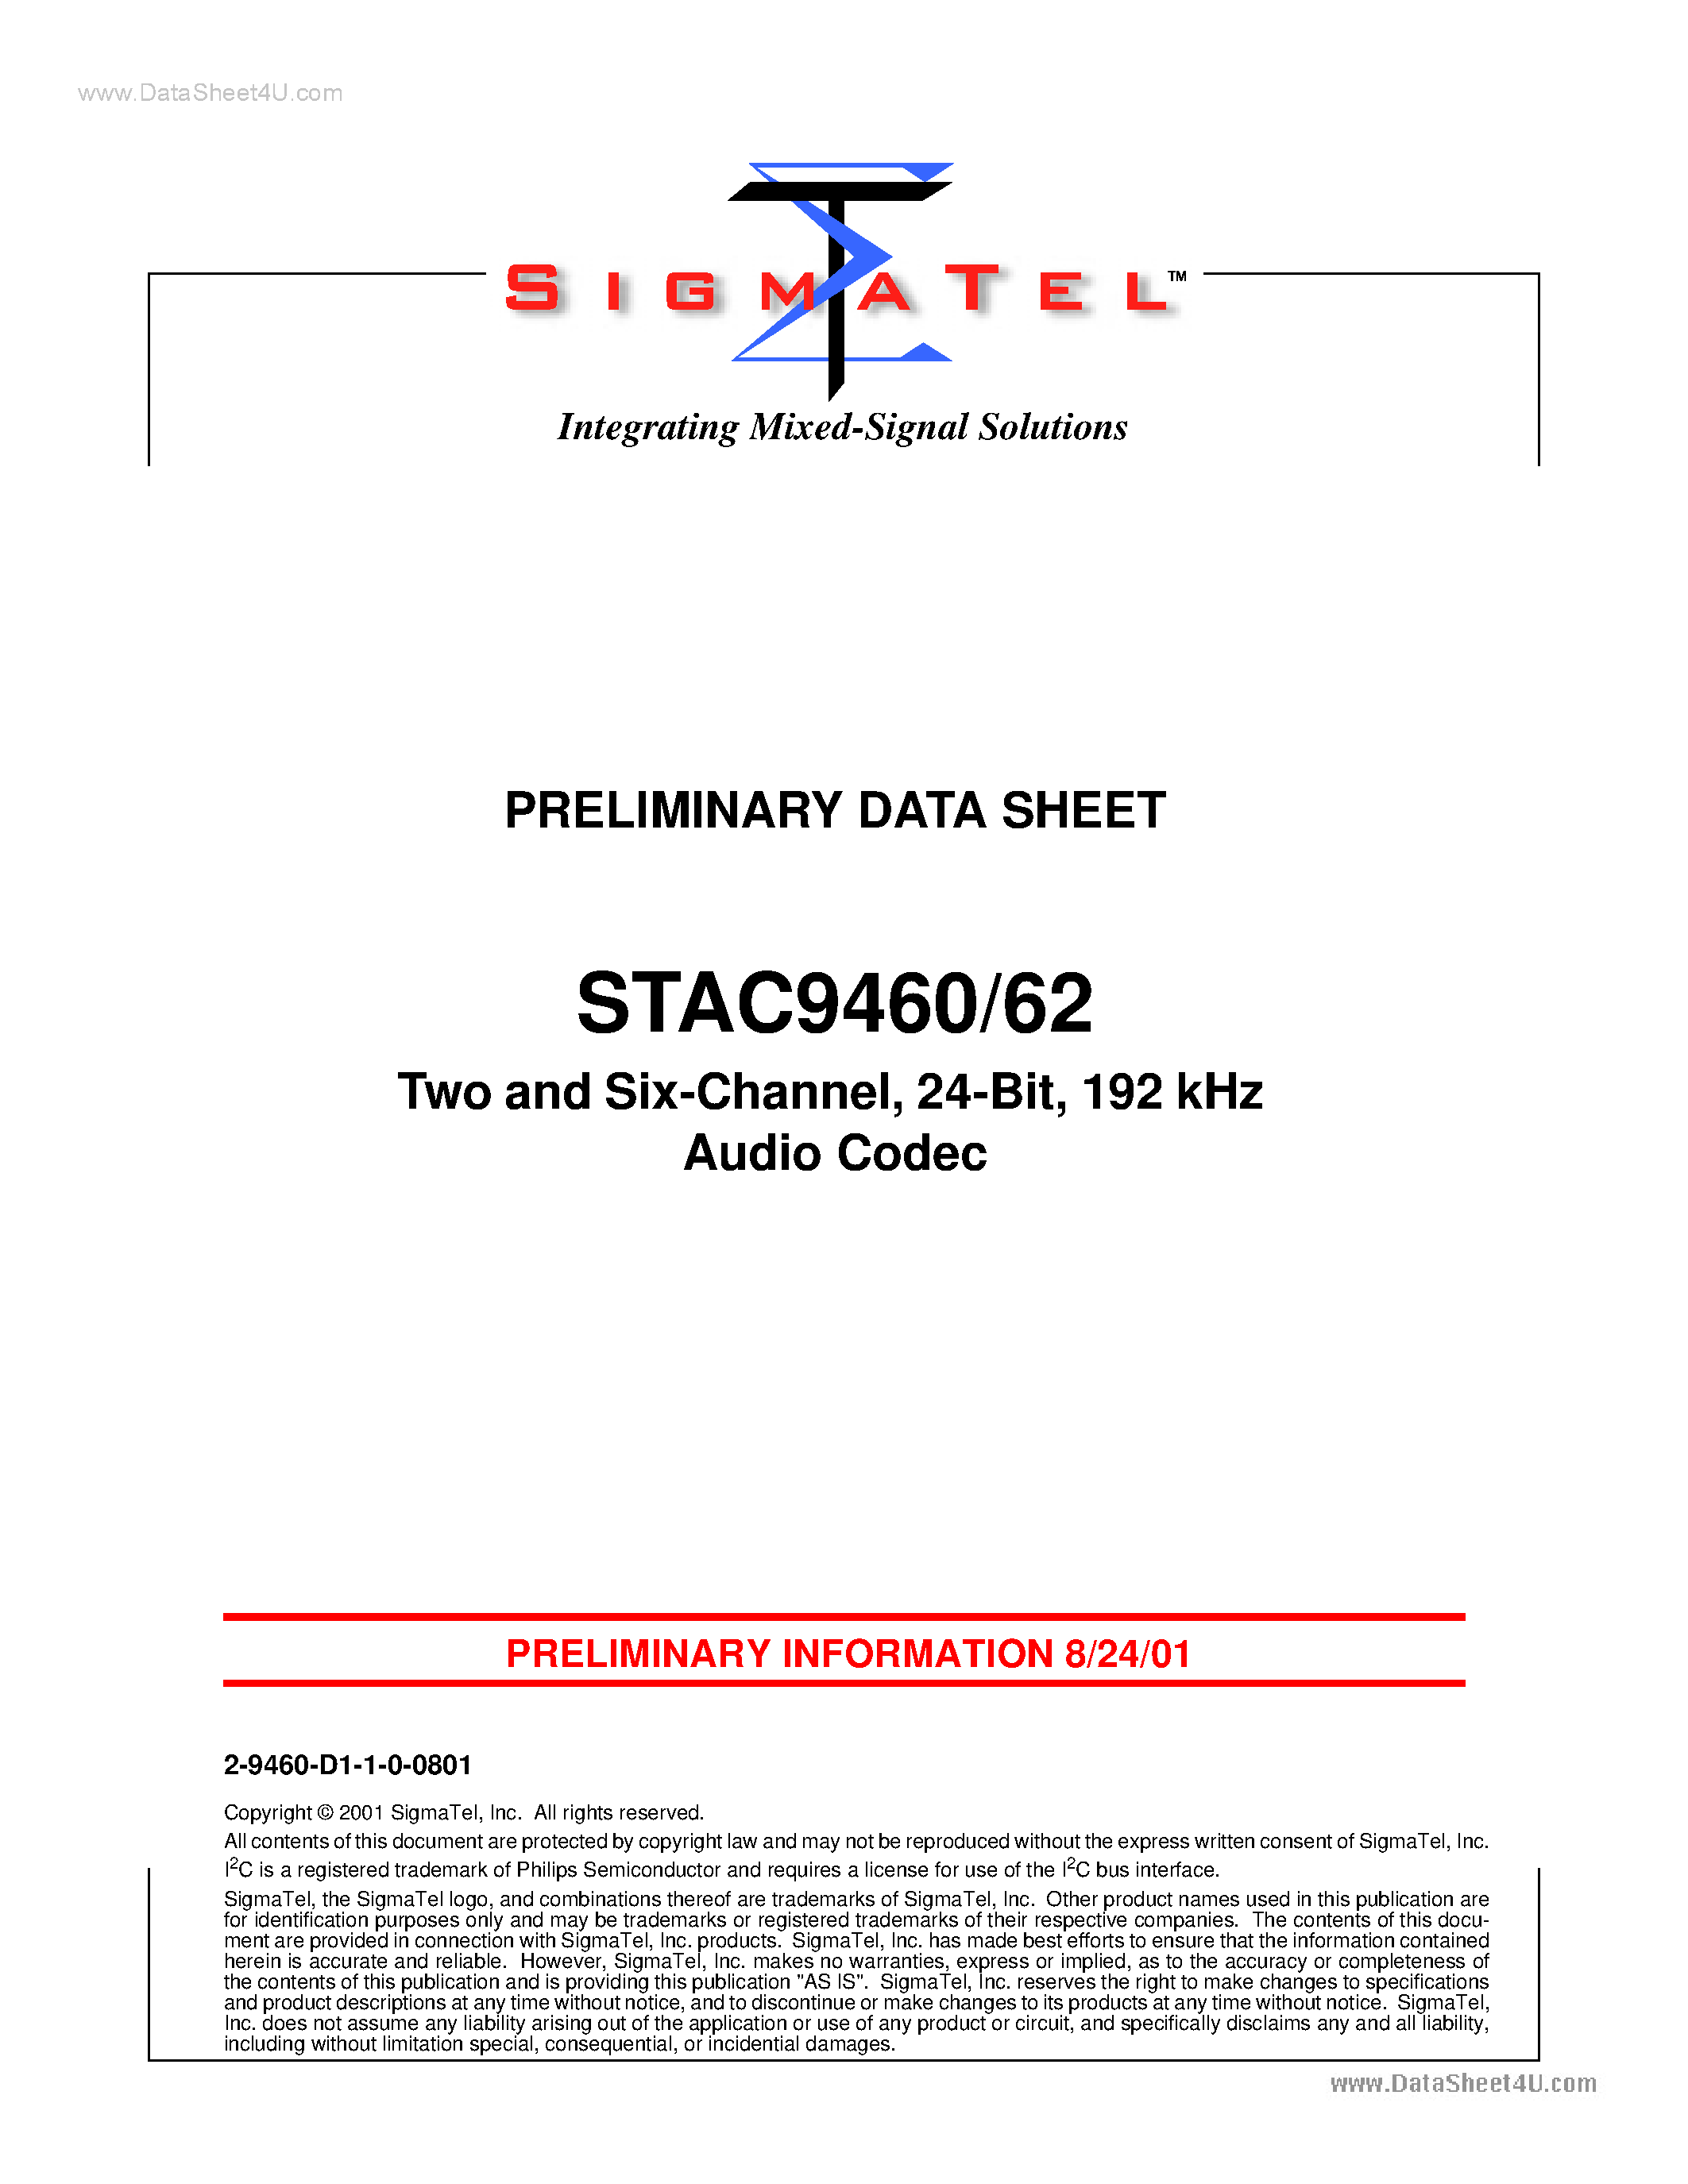 Datasheet STAC9460 - (STAC9460 / STAC9462) Two and Six-Channel Audio Codec page 1